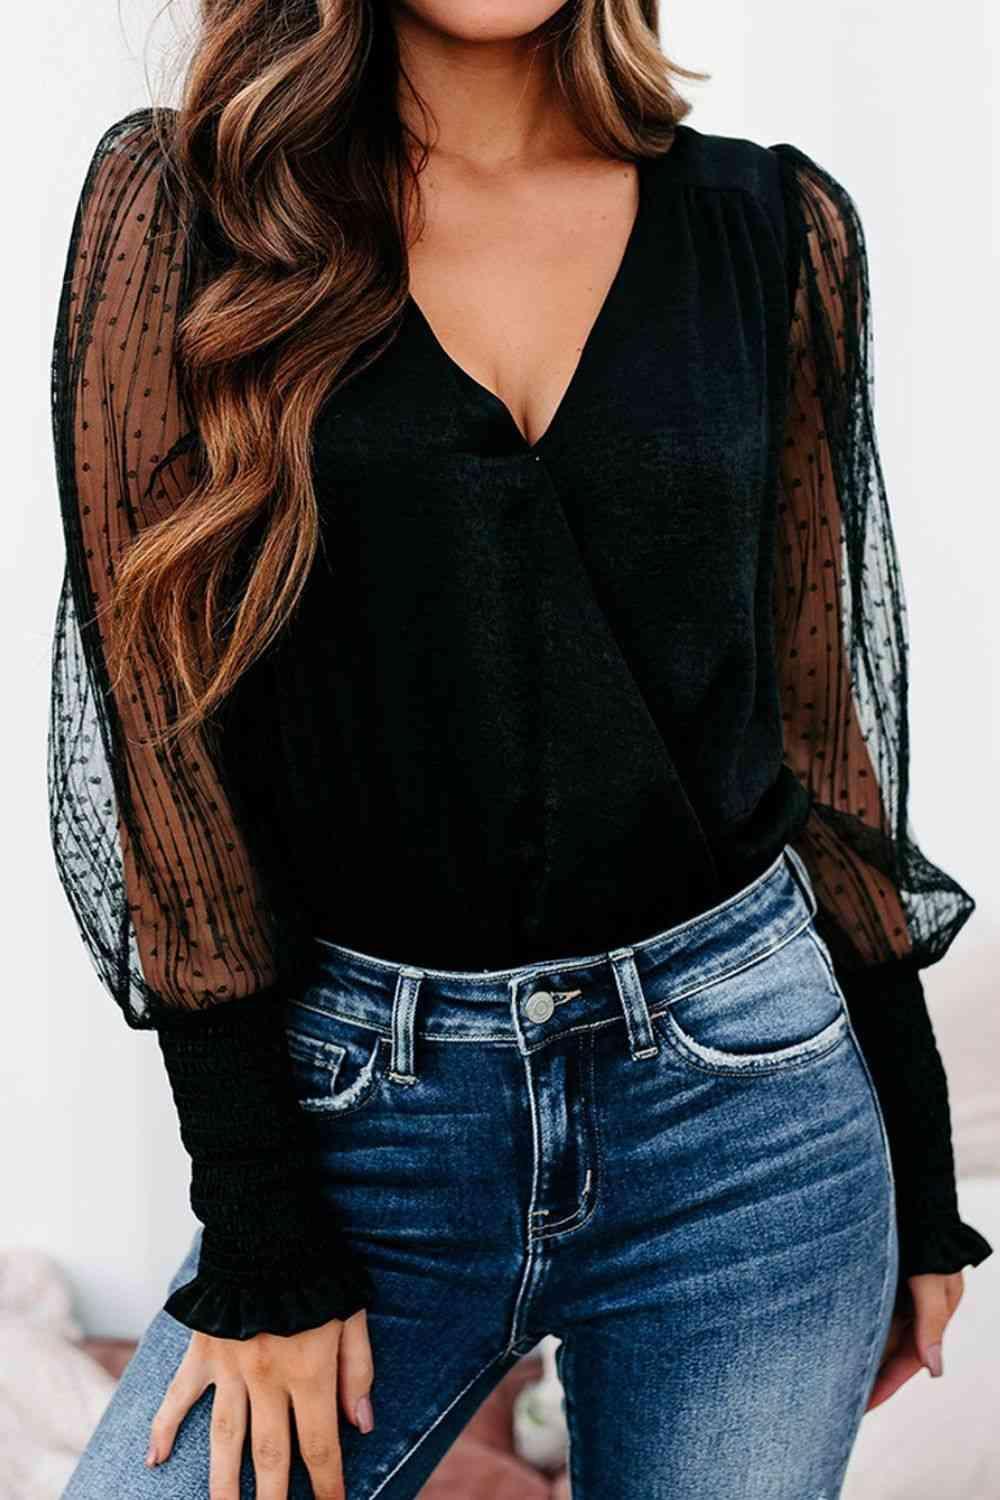 a woman wearing a black top and jeans